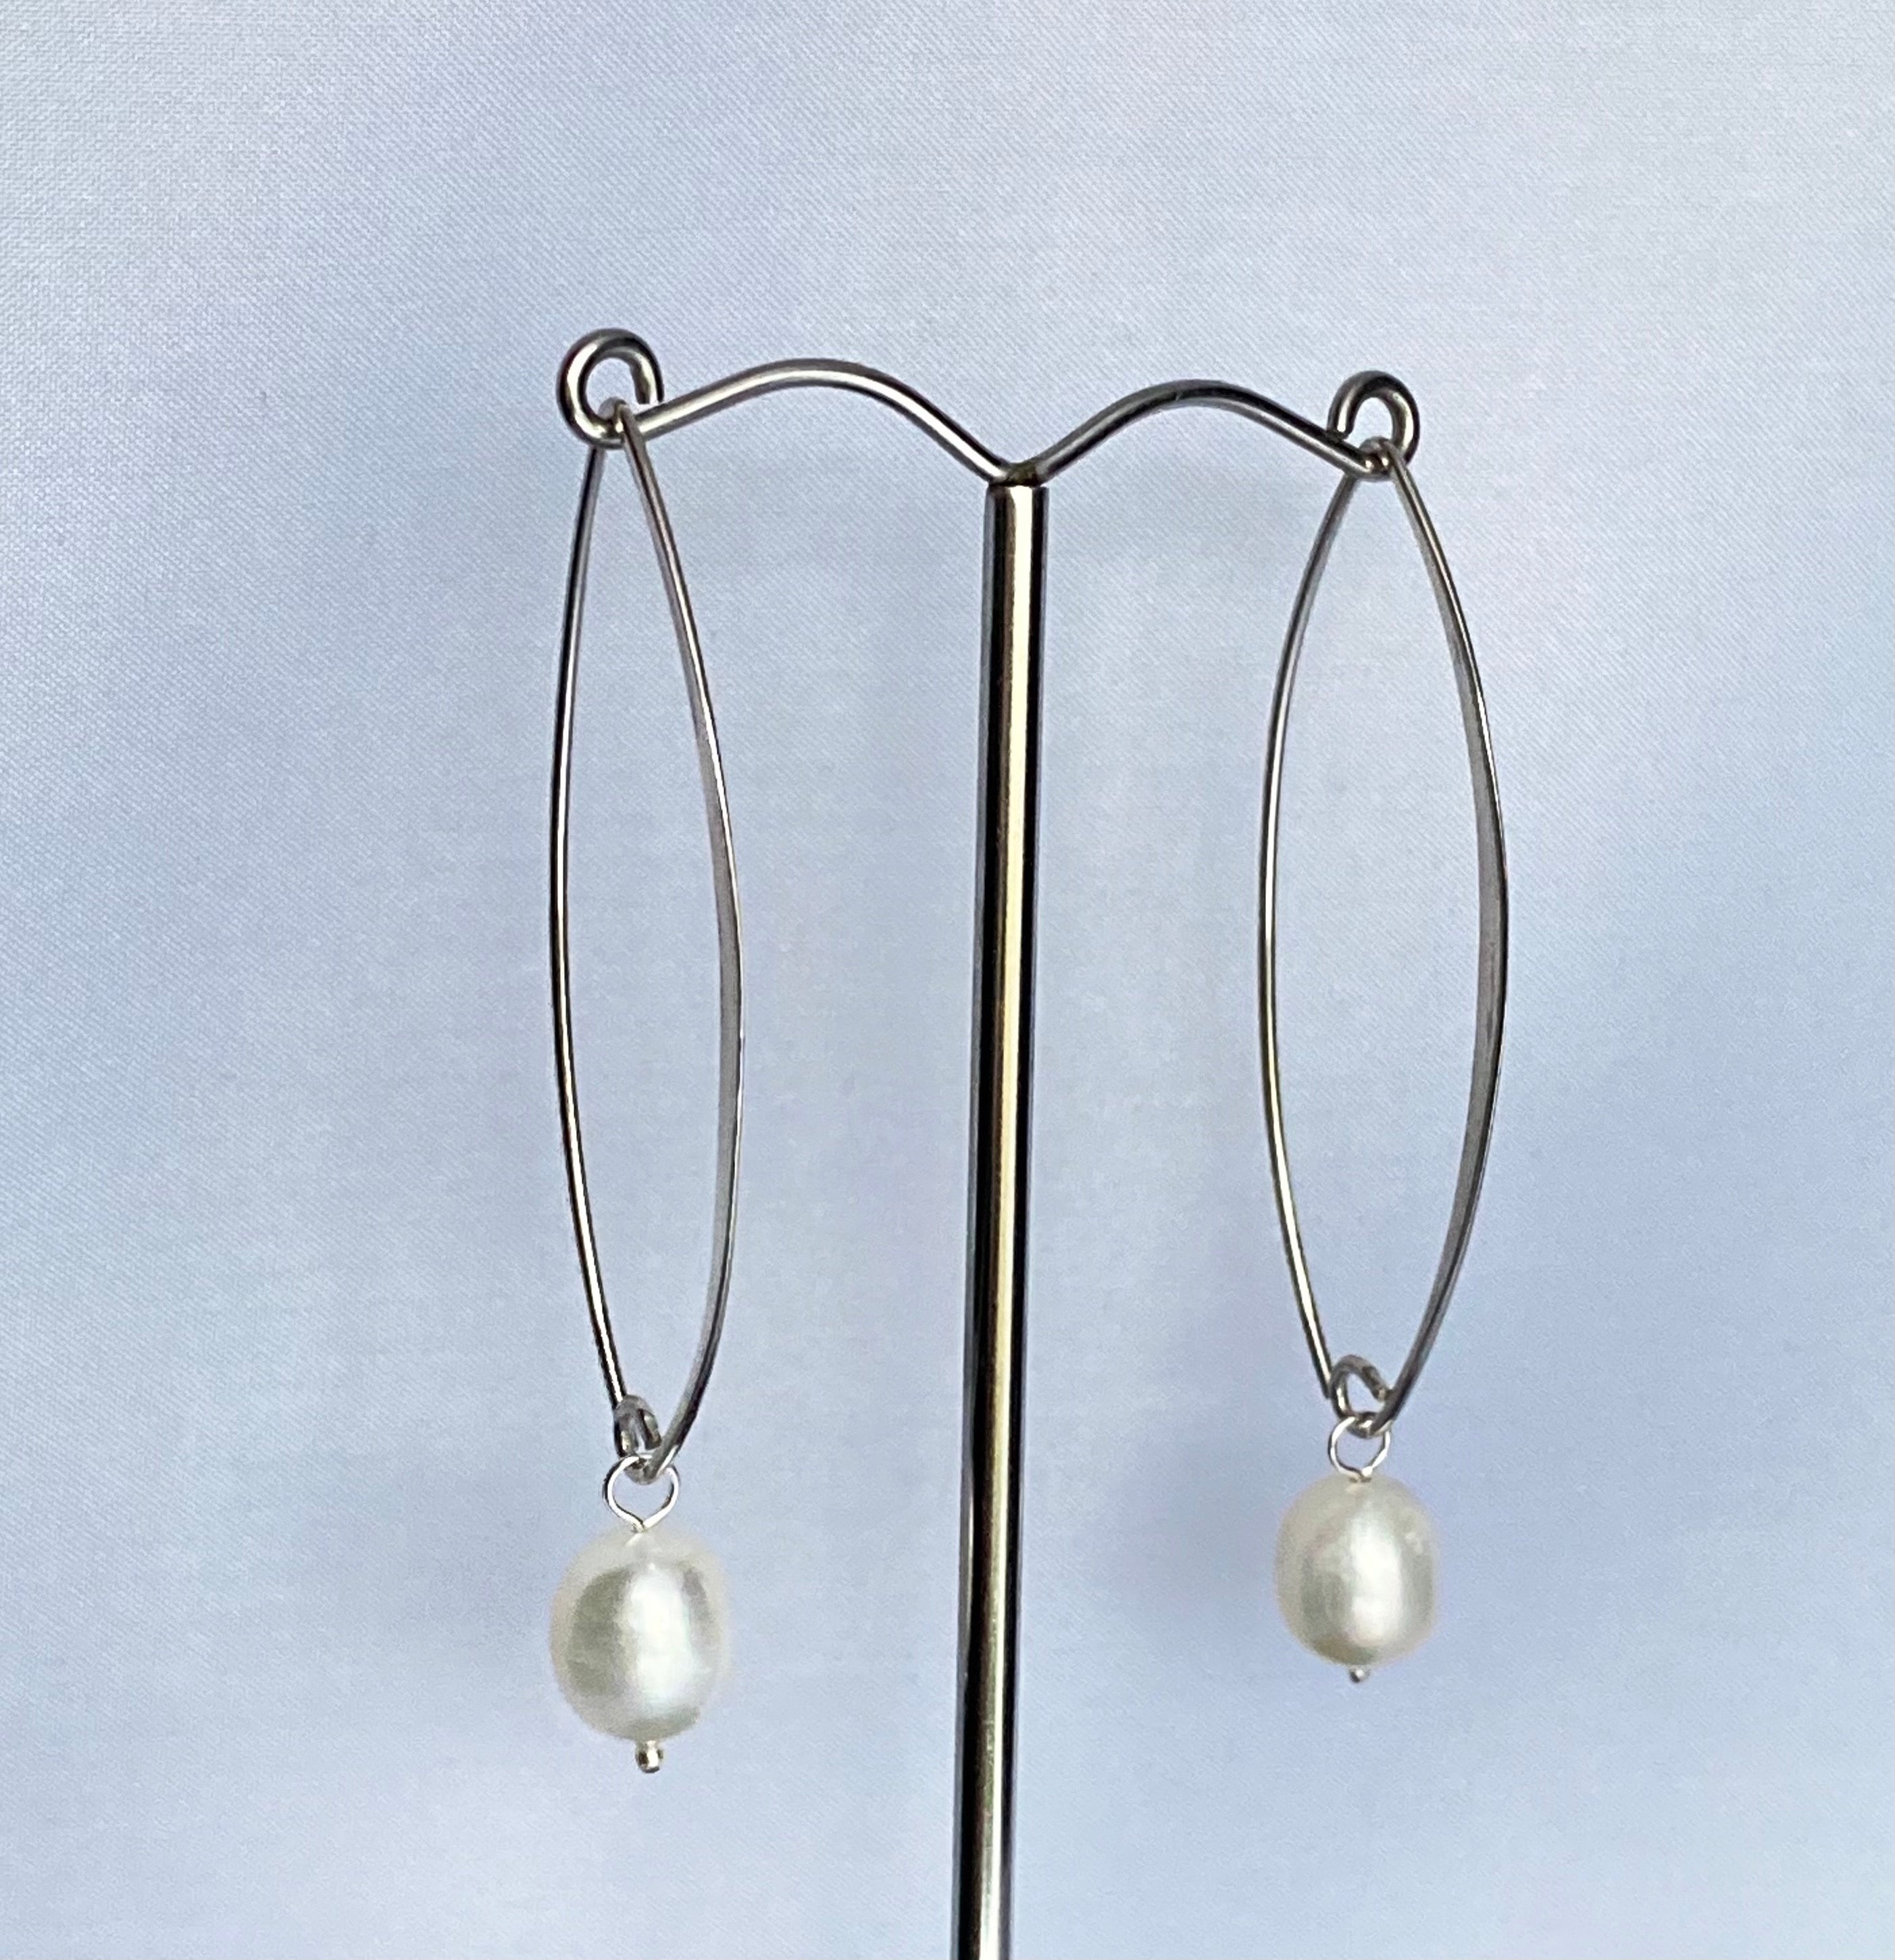 Long Sterling Silver Threader Earrings with White Pearl Drop